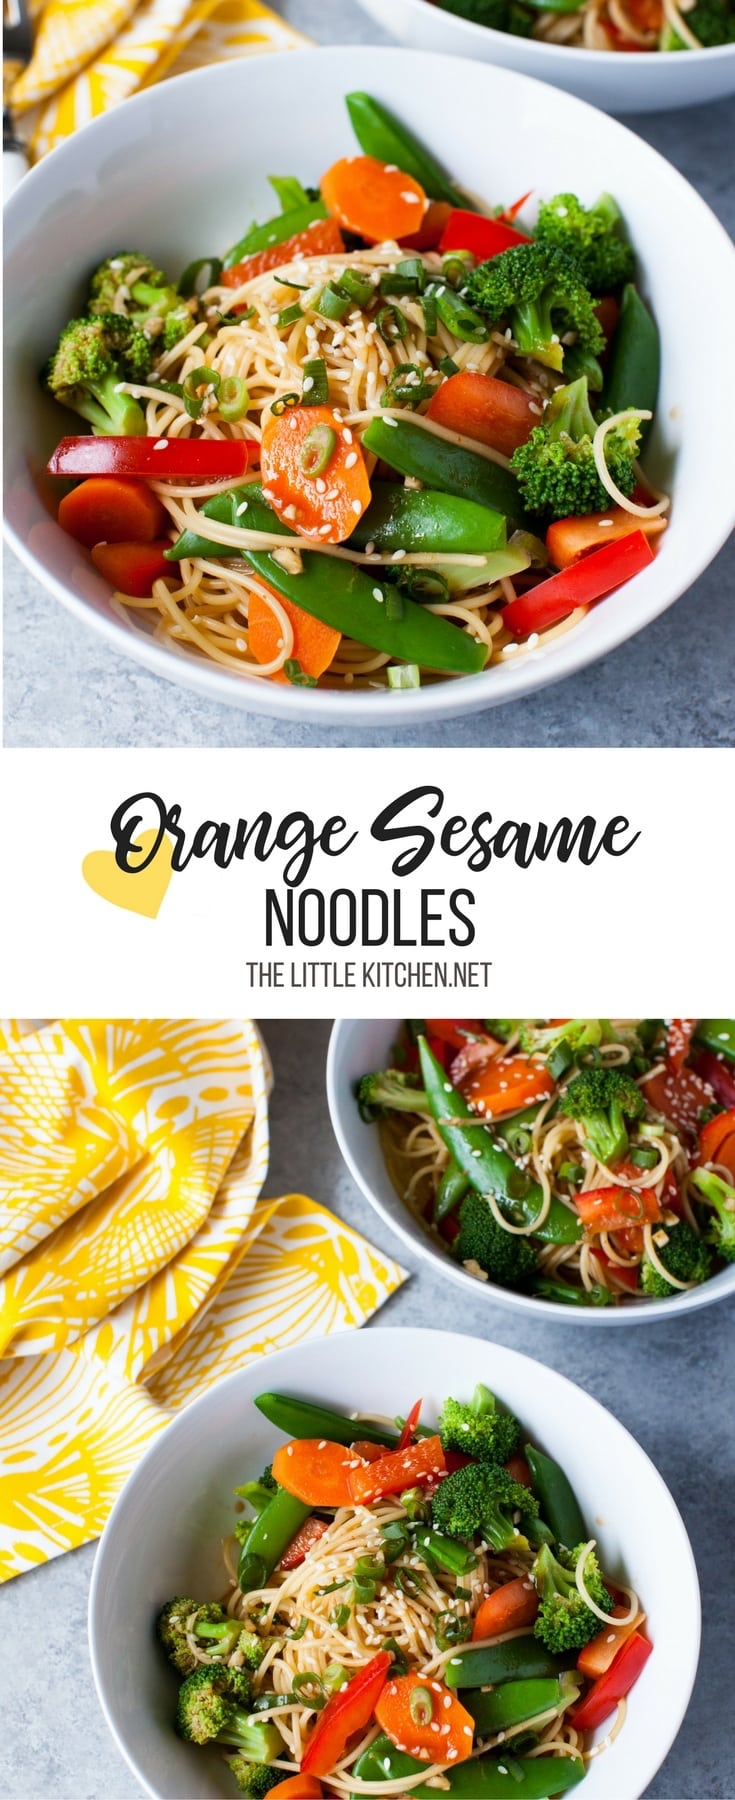 Orange Sesame Noodles with Vegetables from thelittlekitchen.net